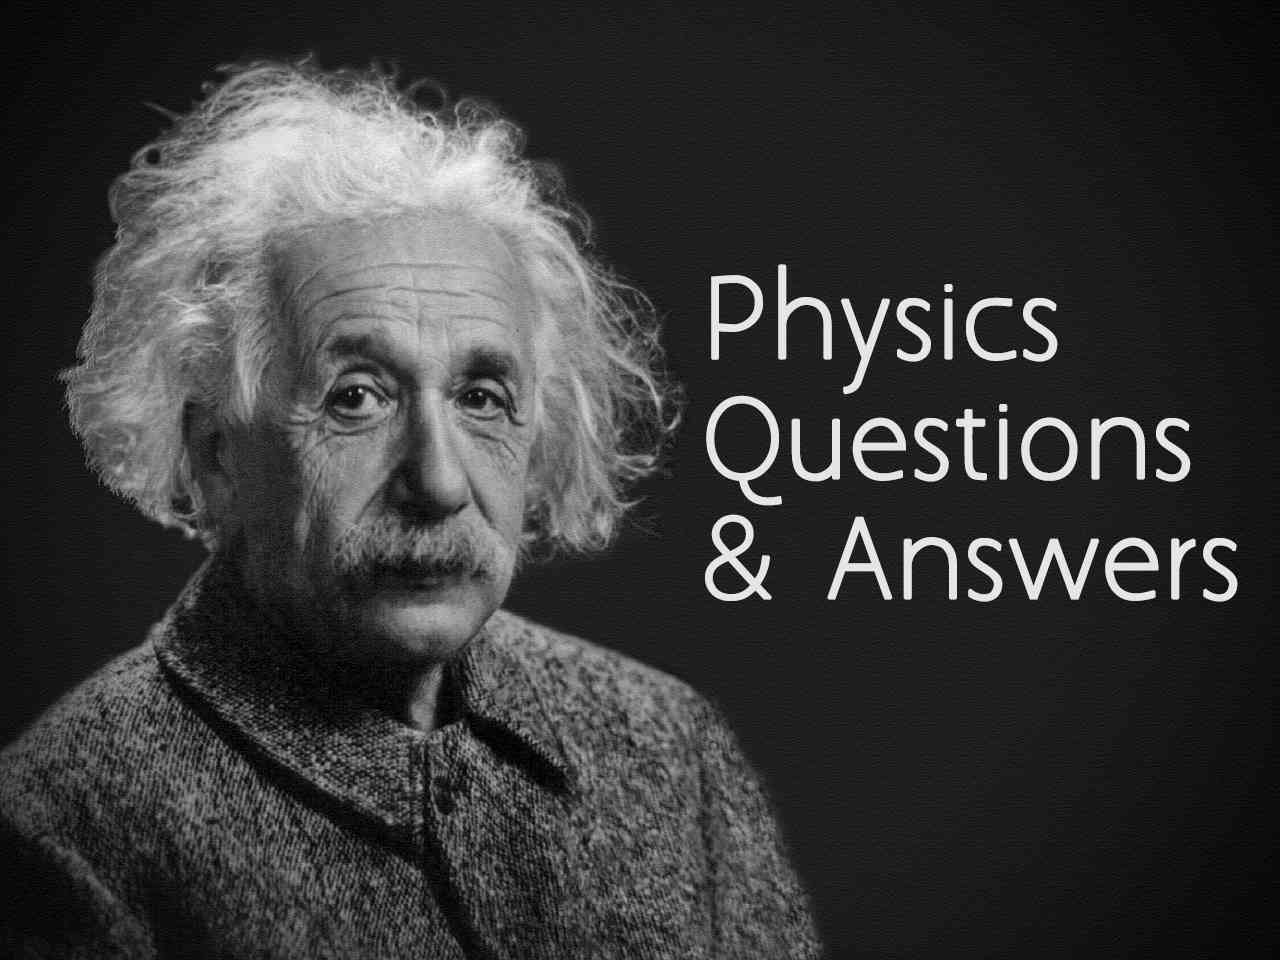 Physics Questions and Answers - Basic Physics